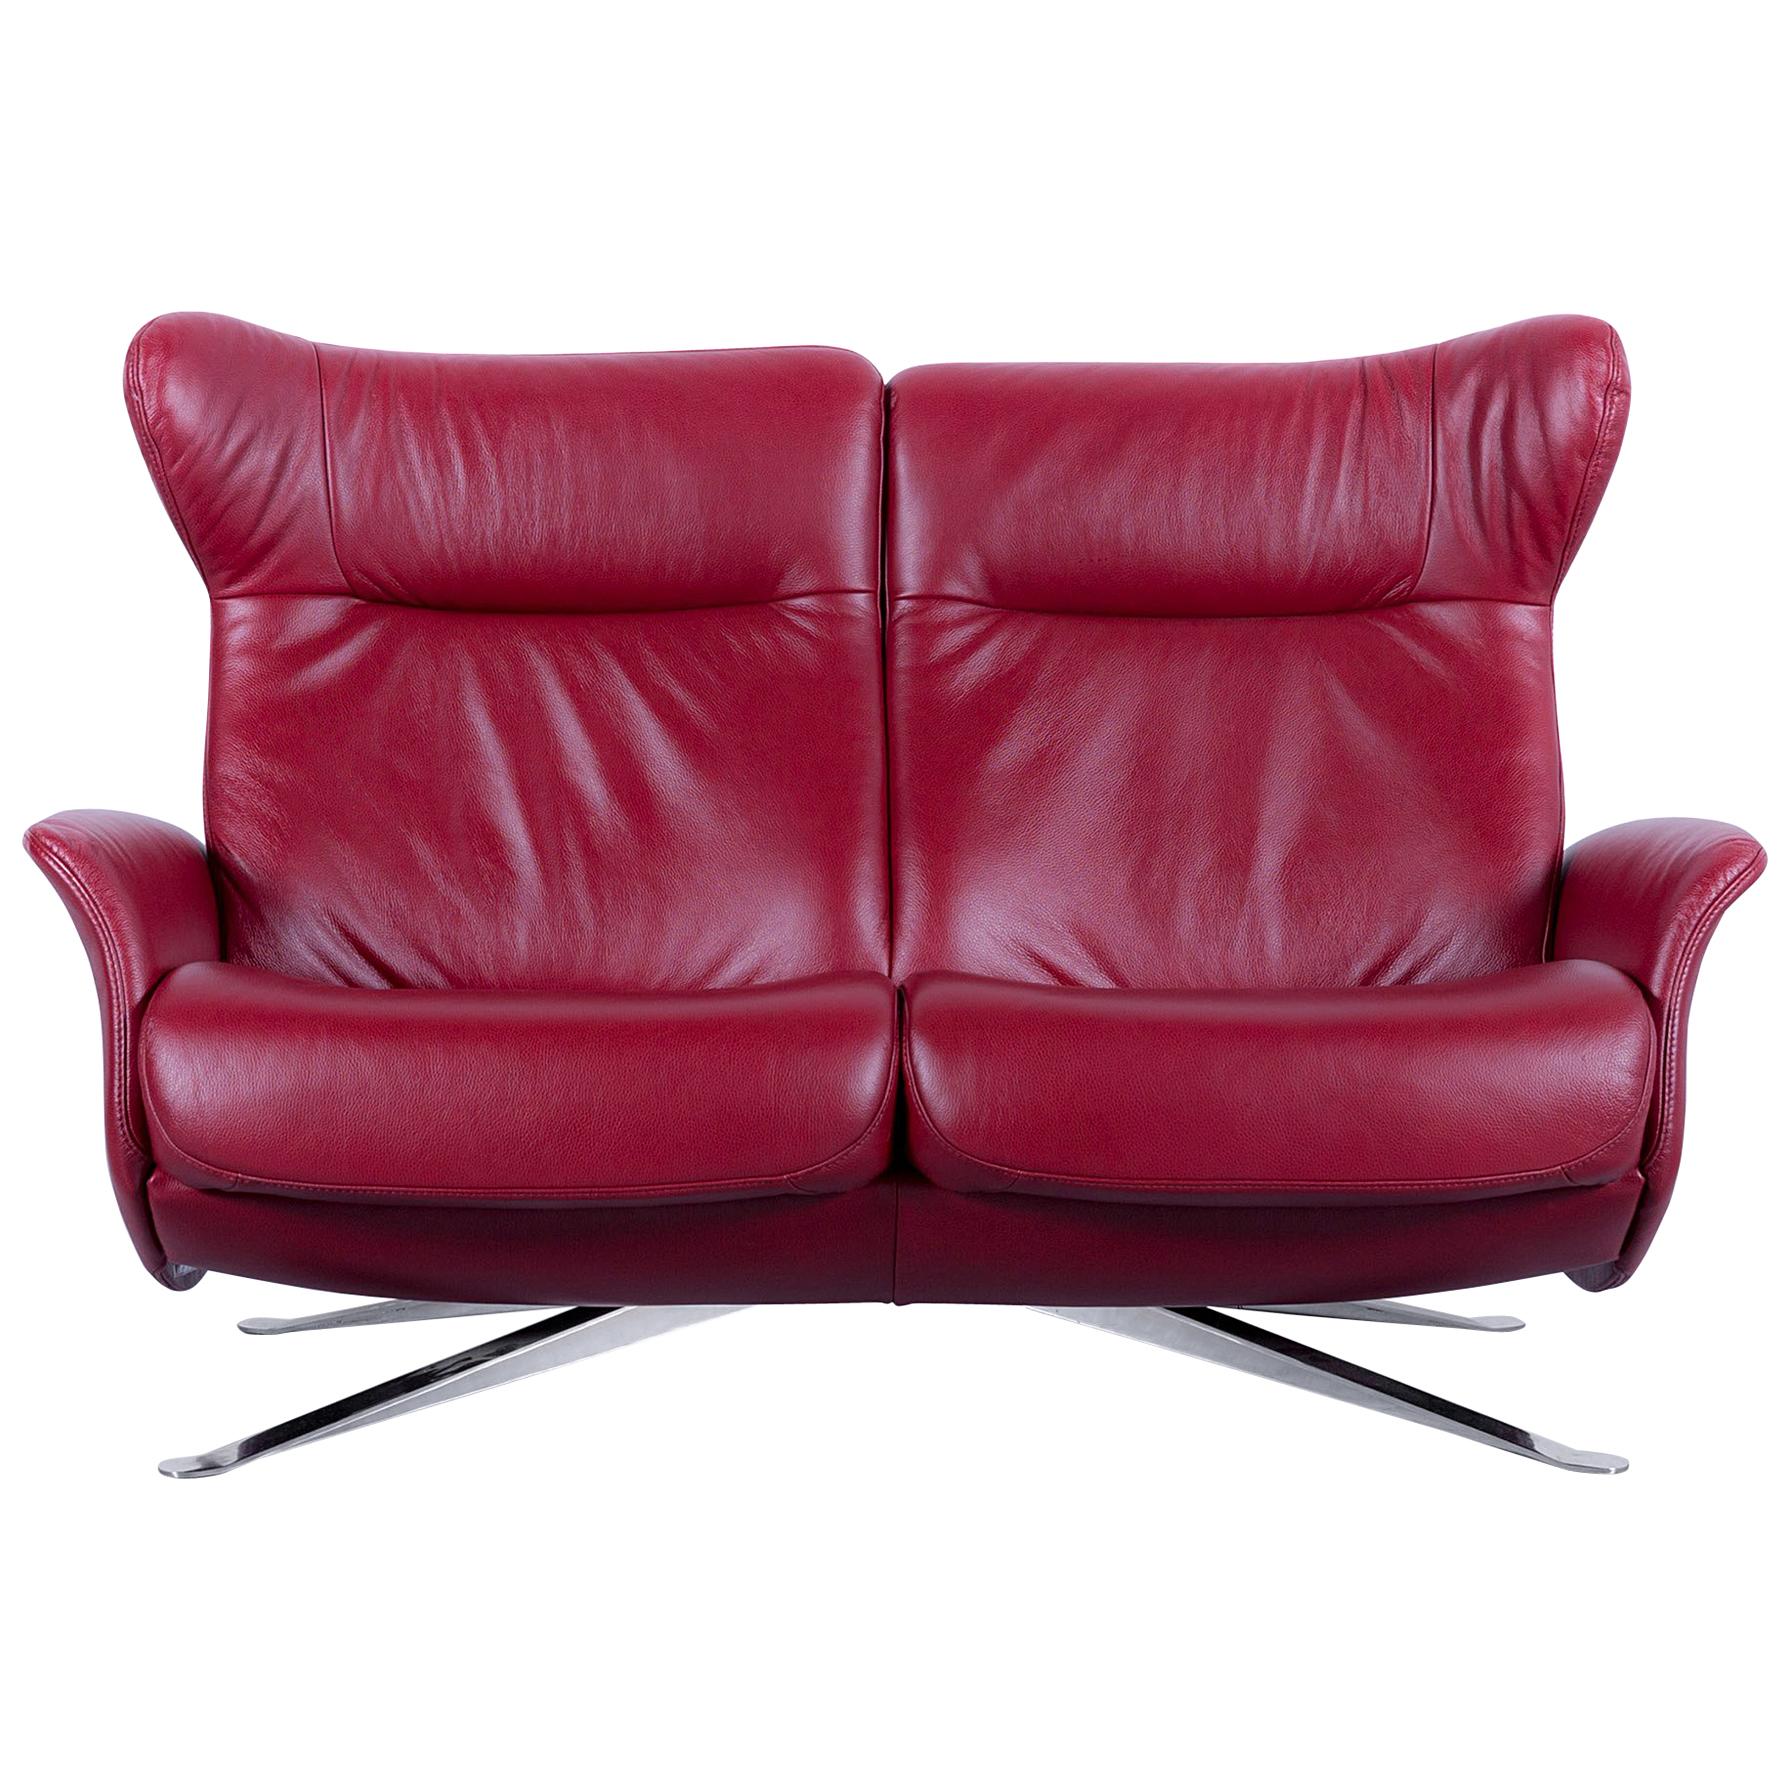 Joop, Leather Sofa Red Two-Seat Recliner